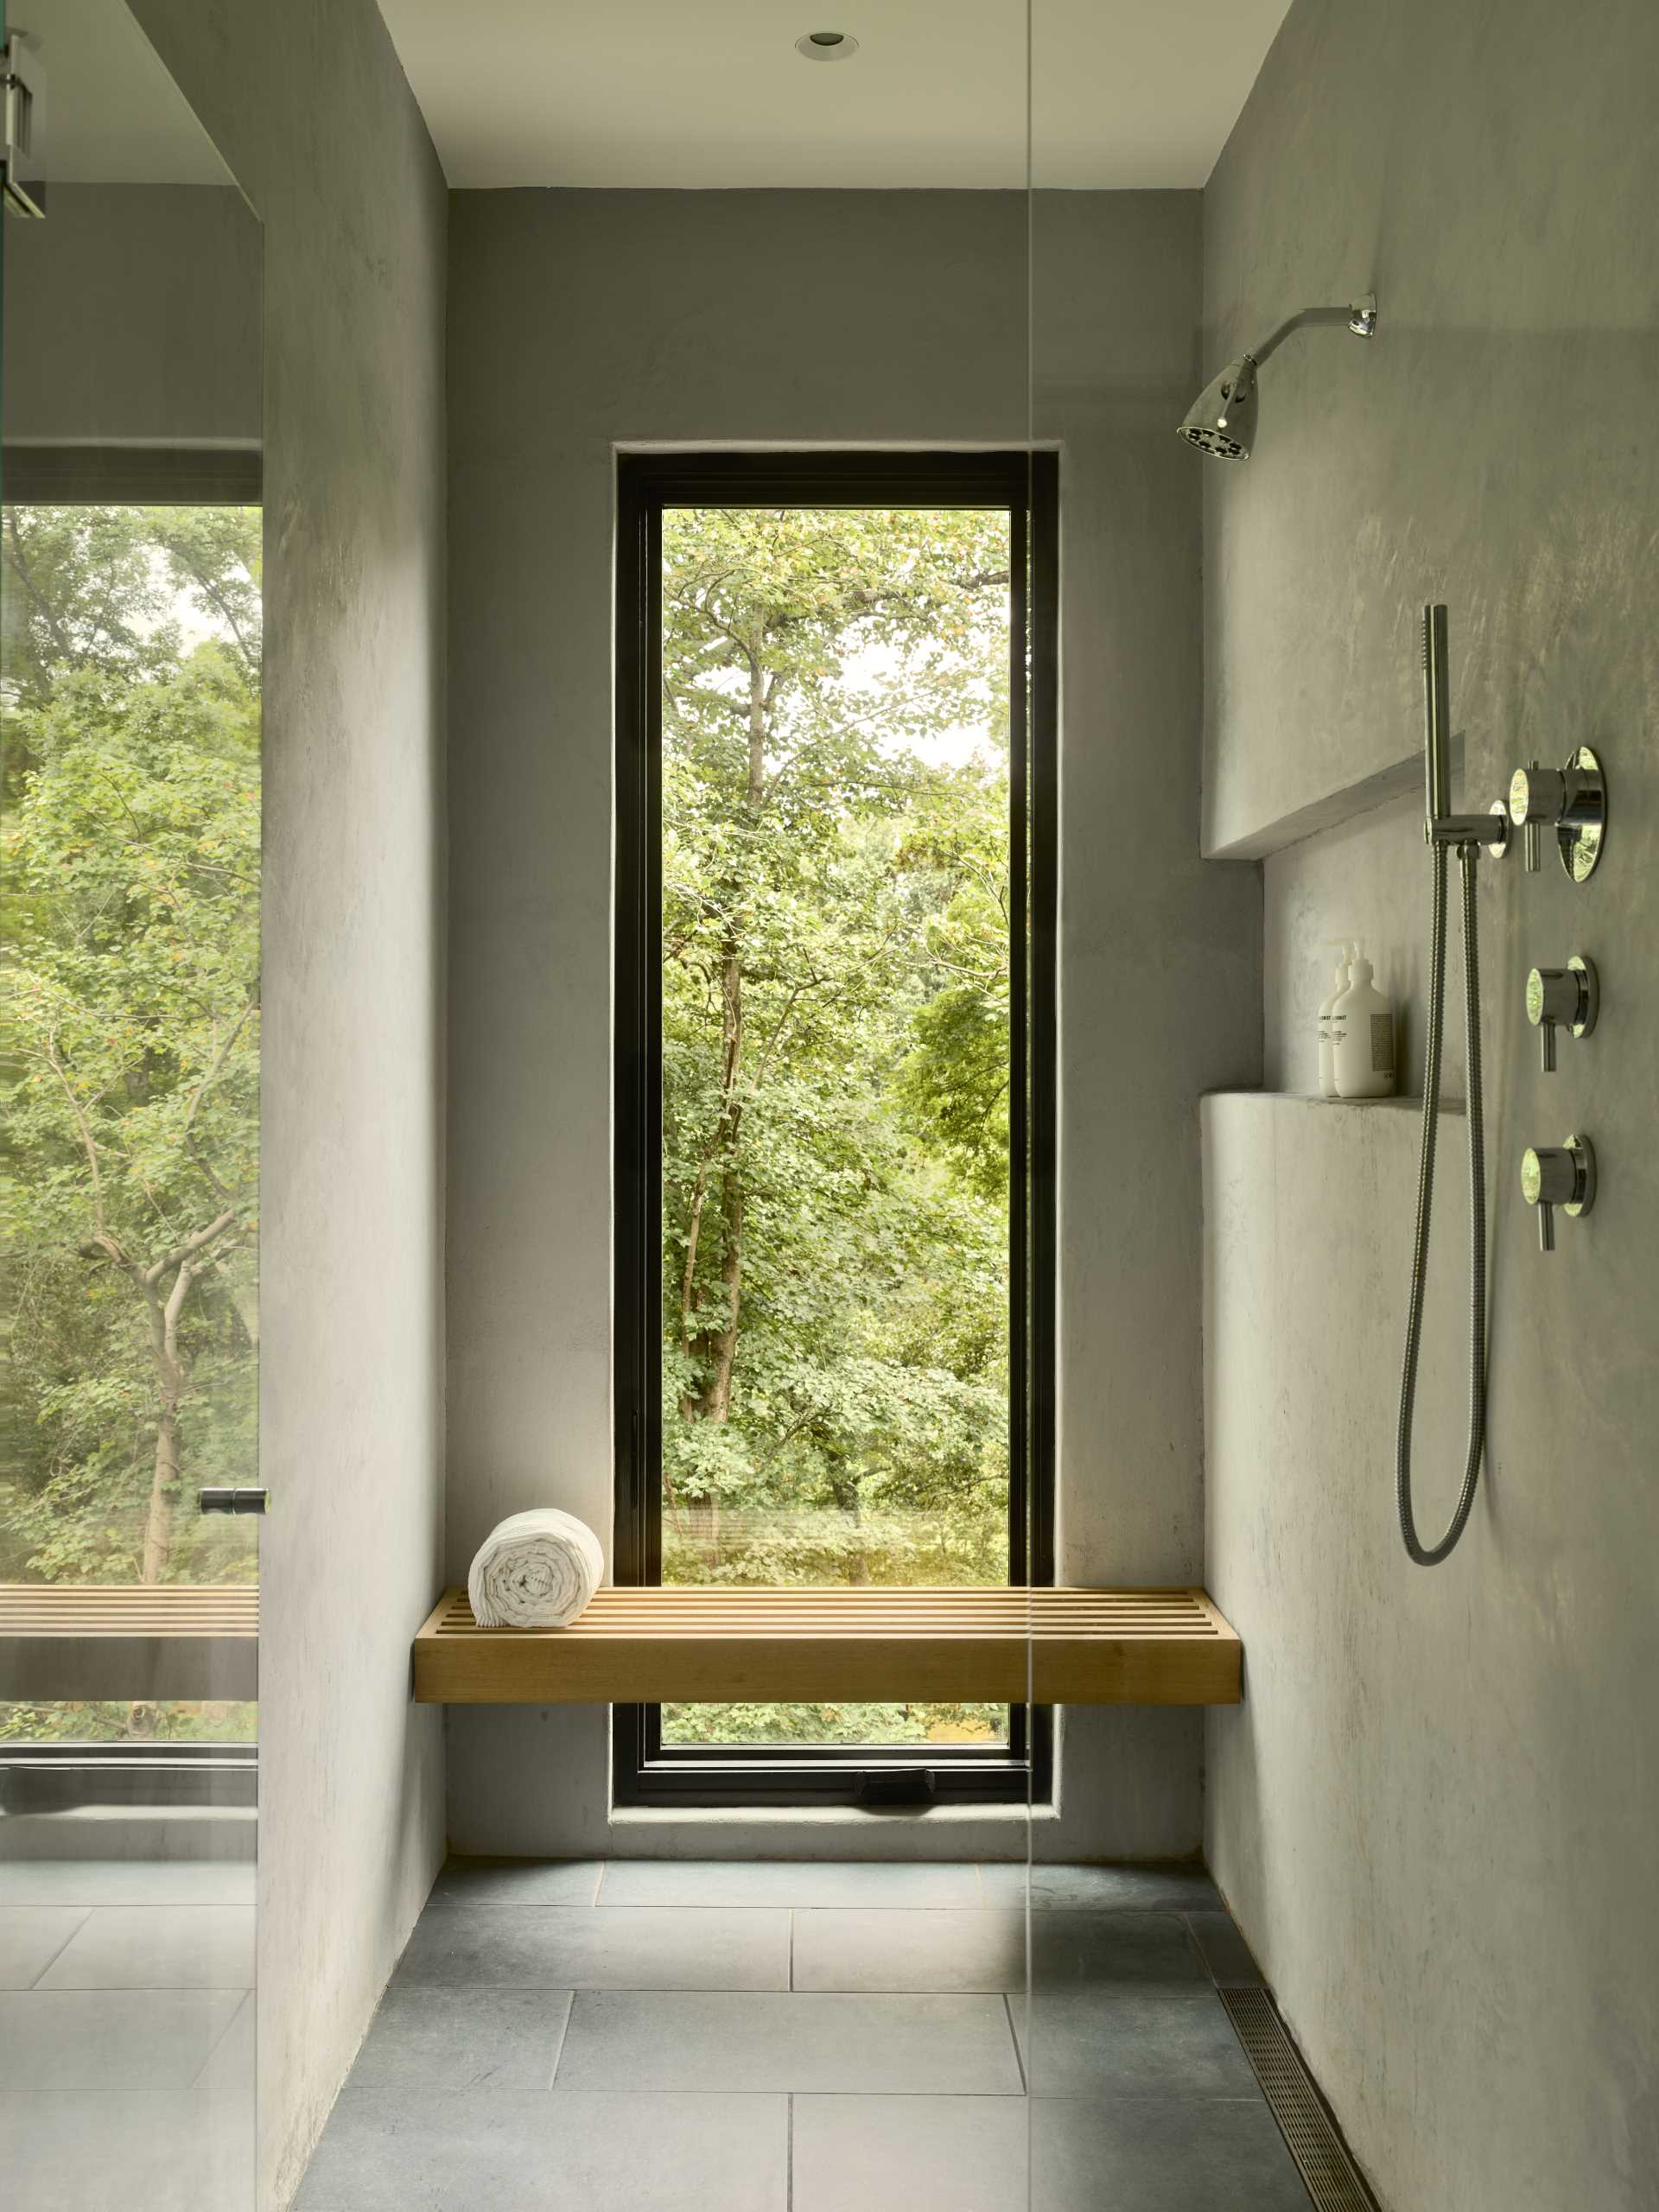 A modern bathroom with a window in the shower that frames the forest view.